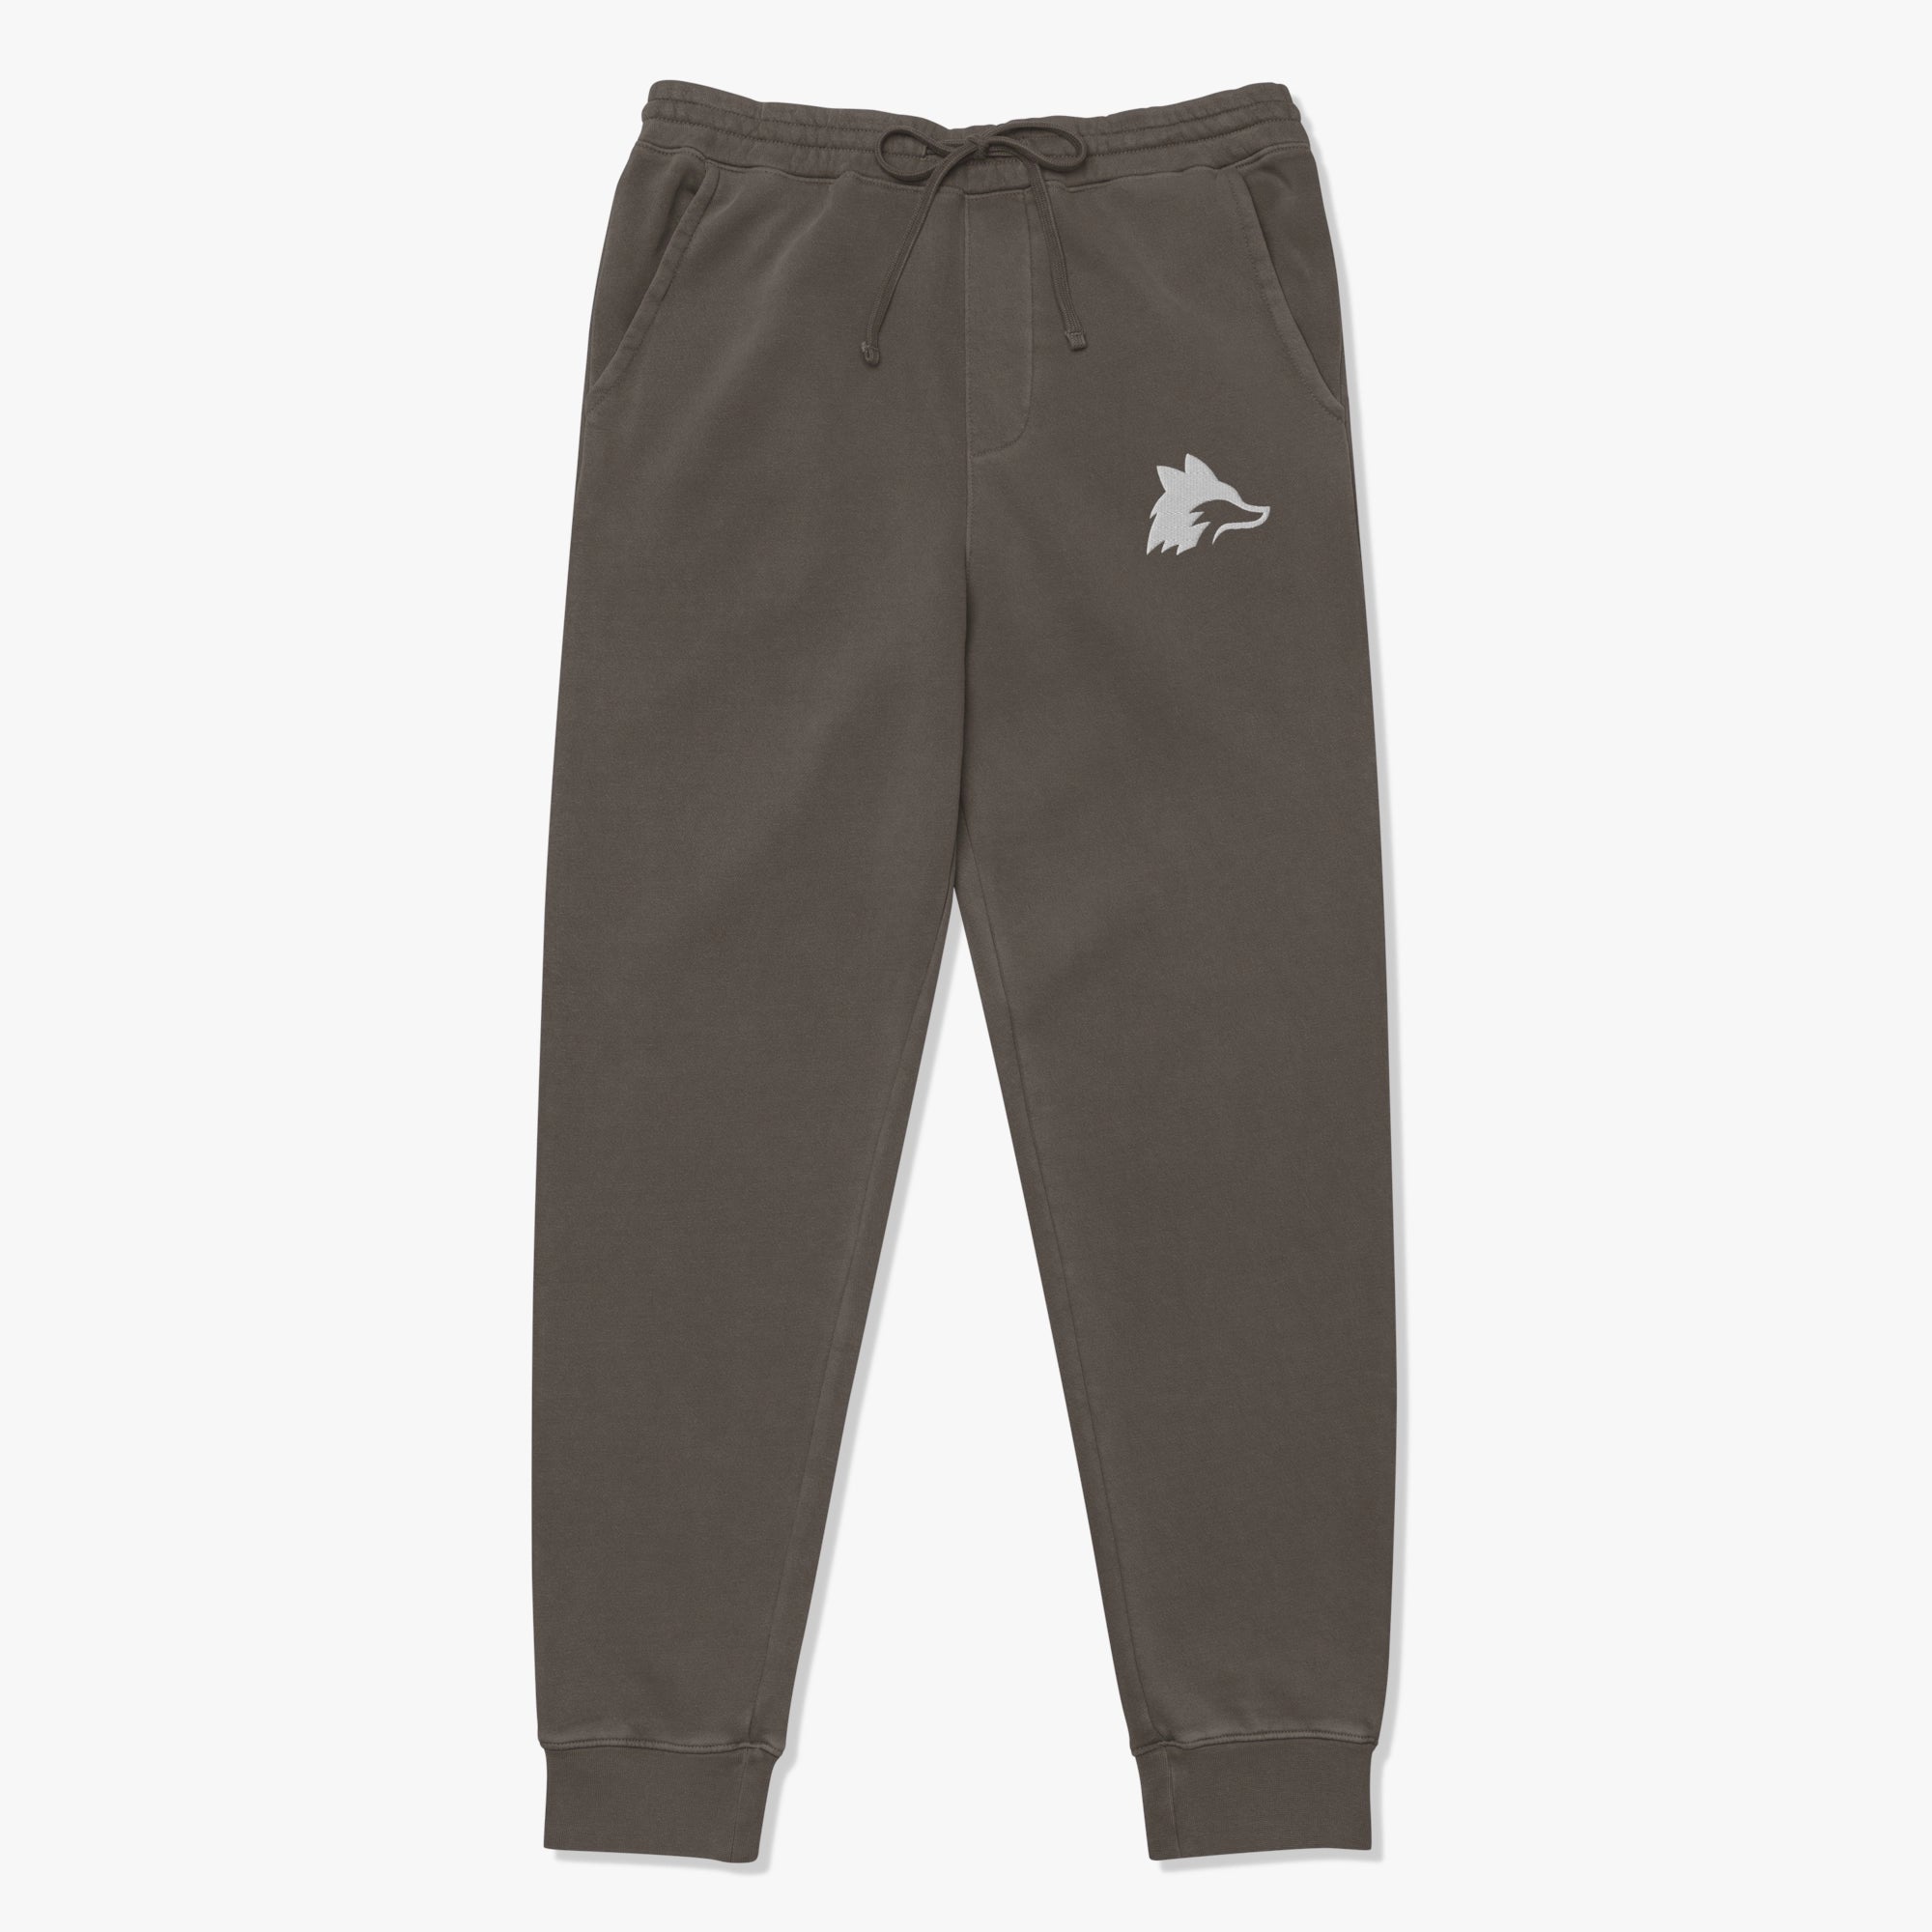 Elevate your comfort and style with the Stock 24 Sweatpants by Repulse Gaming. Crafted from 80% cotton and 20% polyester, featuring a 100% cotton shell, these sweatpants boast an embroidered design on the front. Enjoy a relaxed fit with sewn eyelets, a sewn fly, and an elastic waistband with shoe-string drawcords for a customizable fit. The preshrunk fabric ensures a perfect fit, and the sewn-on back pocket adds a practical touch. Stay cozy and on-trend with these versatile sweatpants.